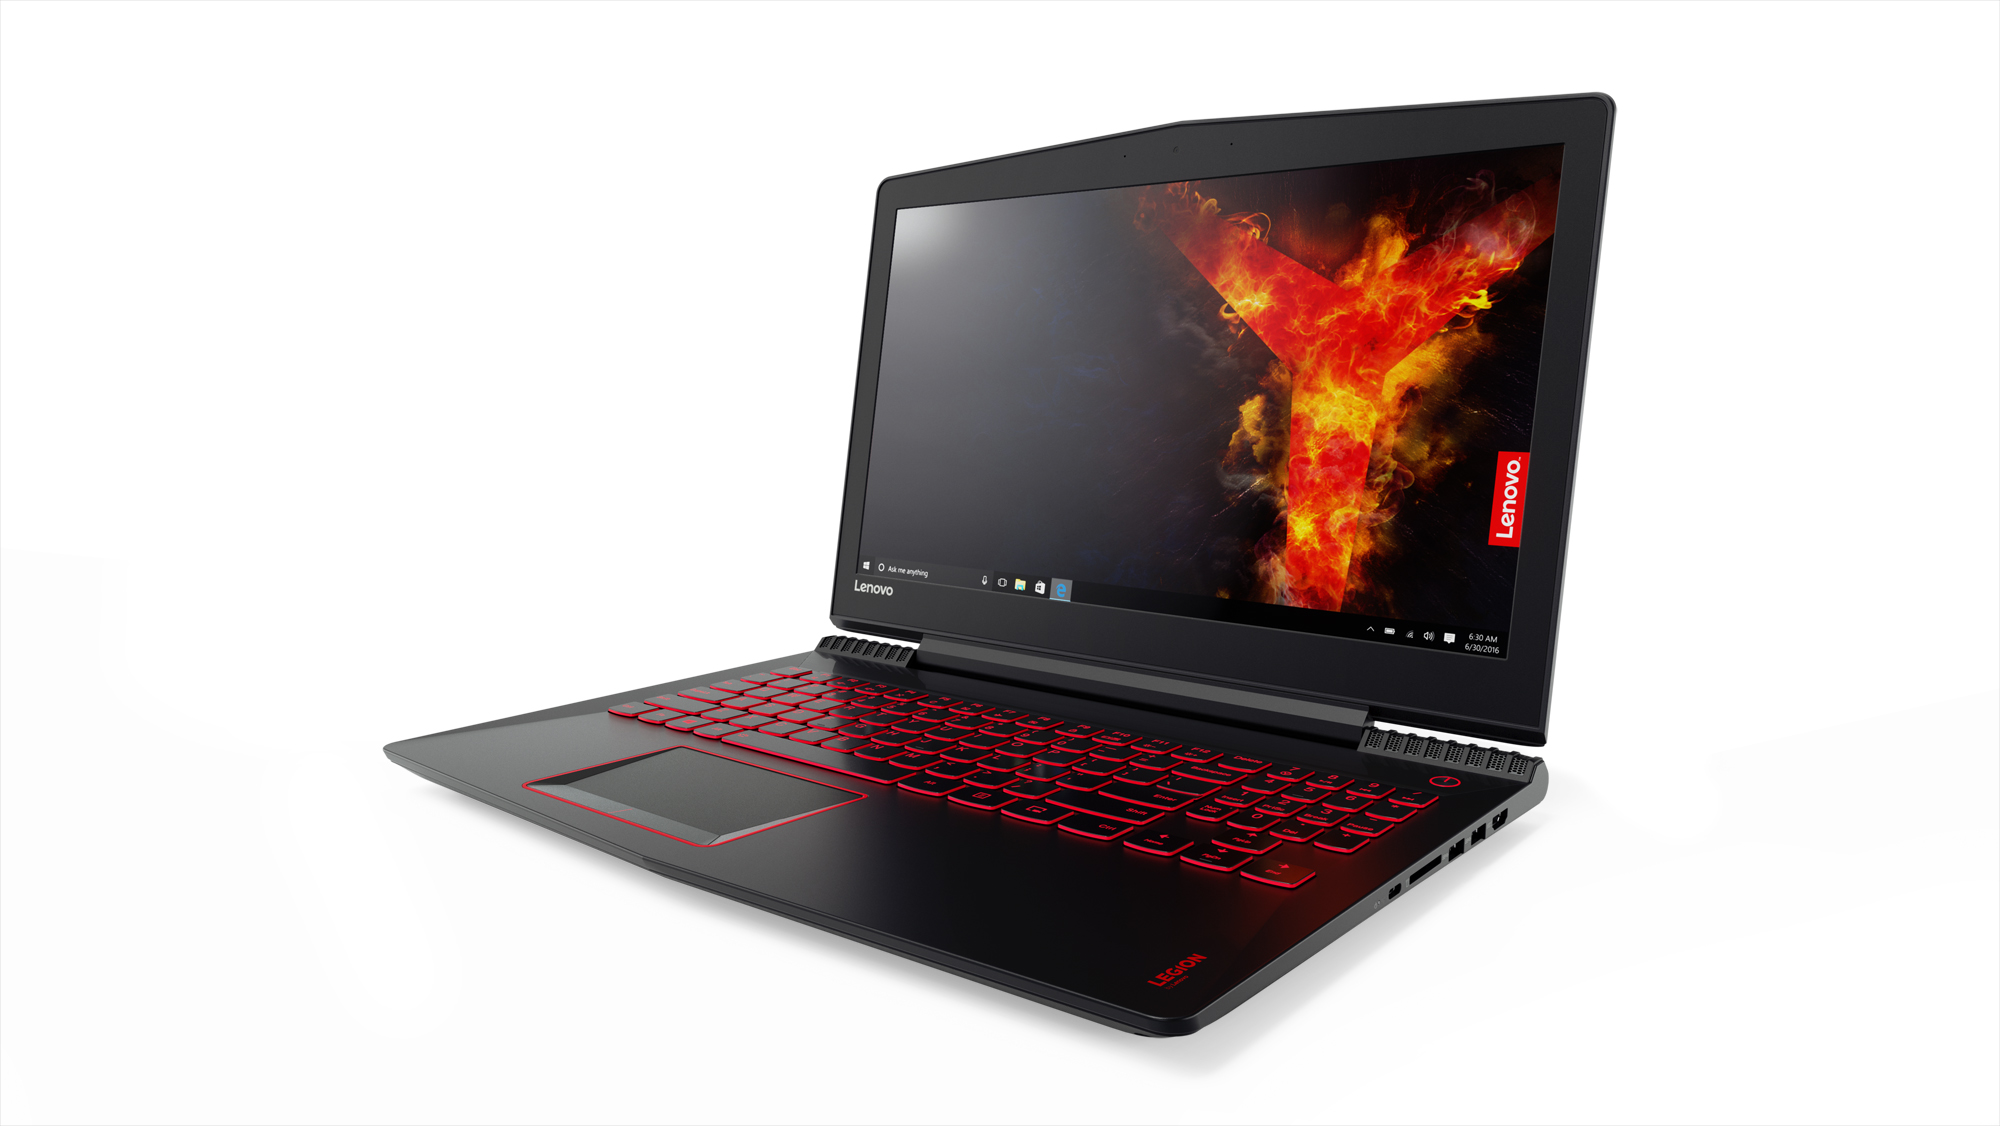 Lenovo Gaming Laptop 15.6", FHD Screen, Intel core i7-7700hq, 2.8-3.8 GHZ, Nvidia GeForce GTX 1050 Ti Graphic Card, 8GB DDR4 Memory, 1TB HDD, 80WK00T2US - image 1 of 17